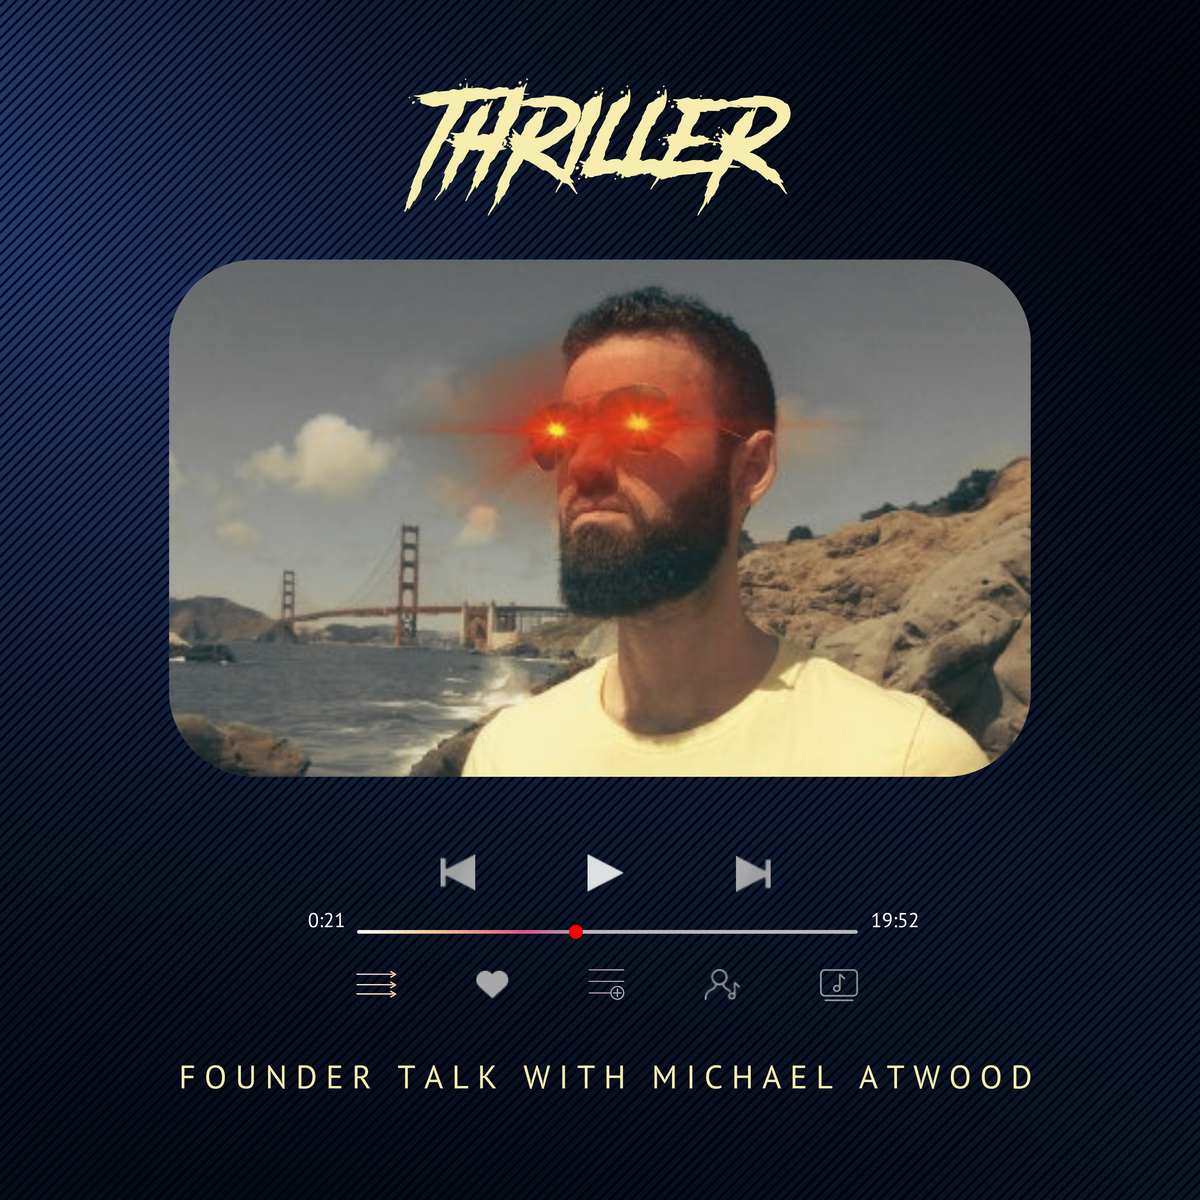 Founder talk with Michael Atwood